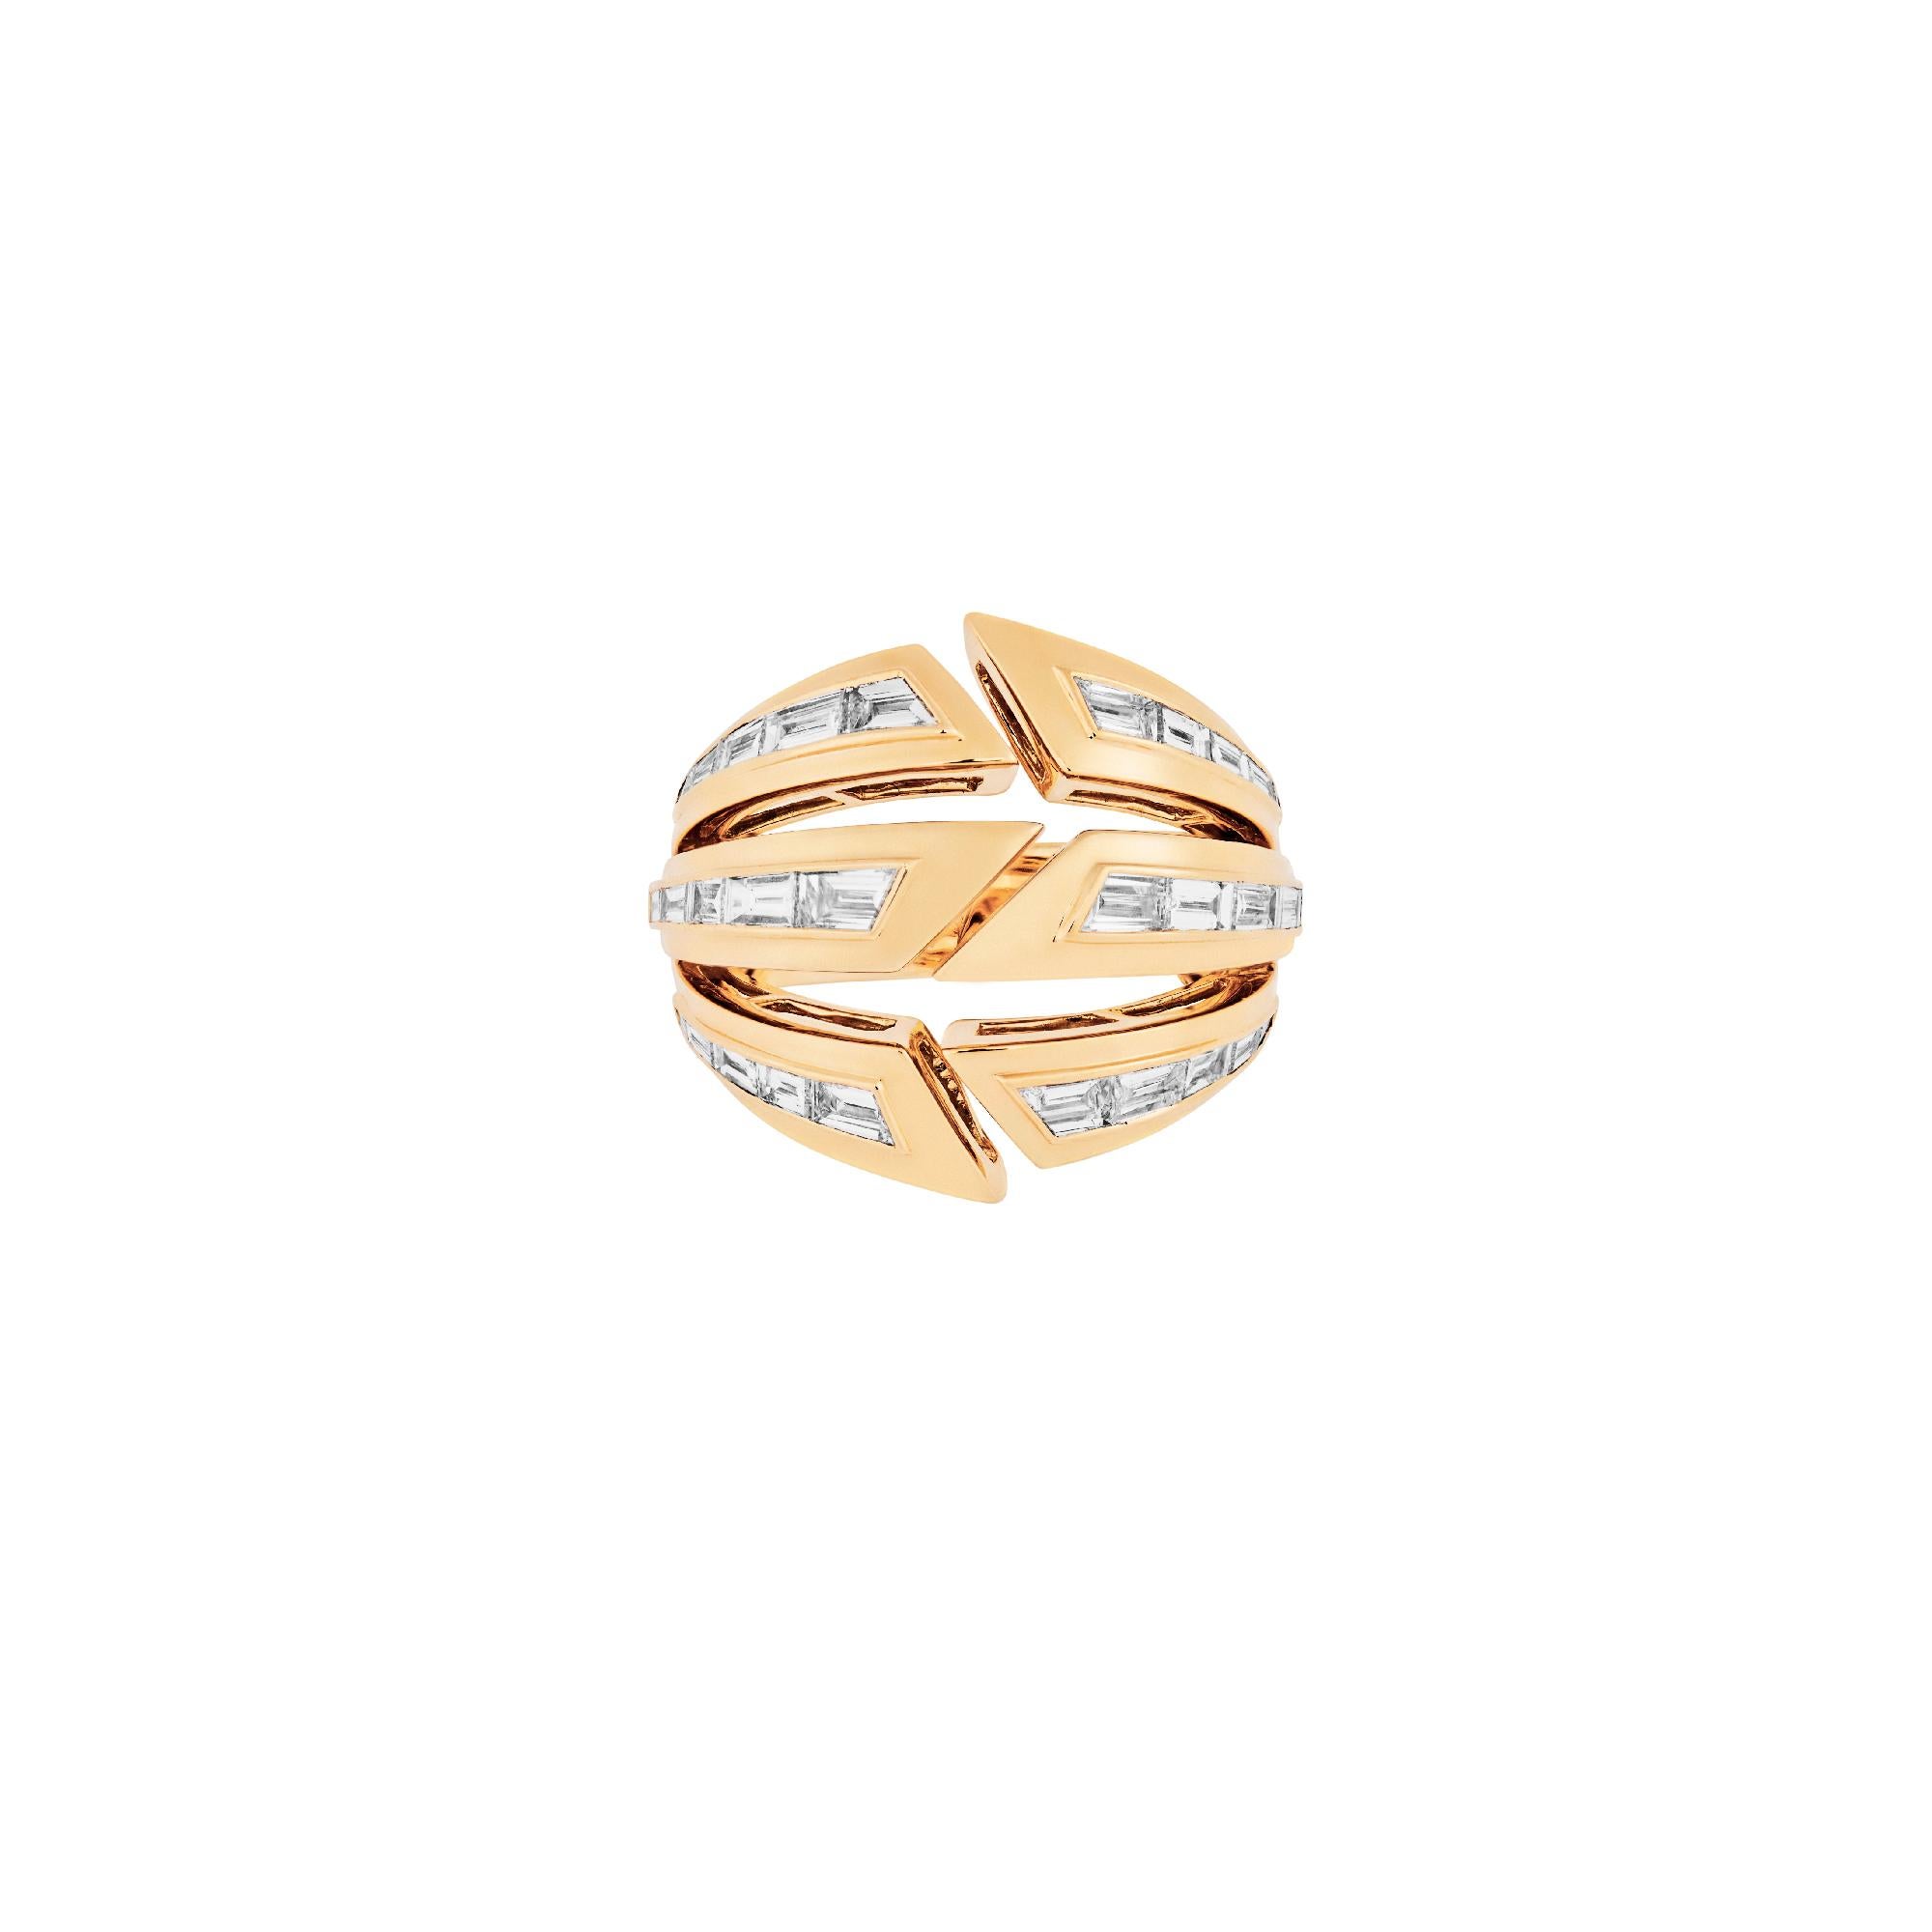 For Sale:  Stephen Webster Dynamite Bombé 18 Carat Yellow Gold and White Diamond Ring 2